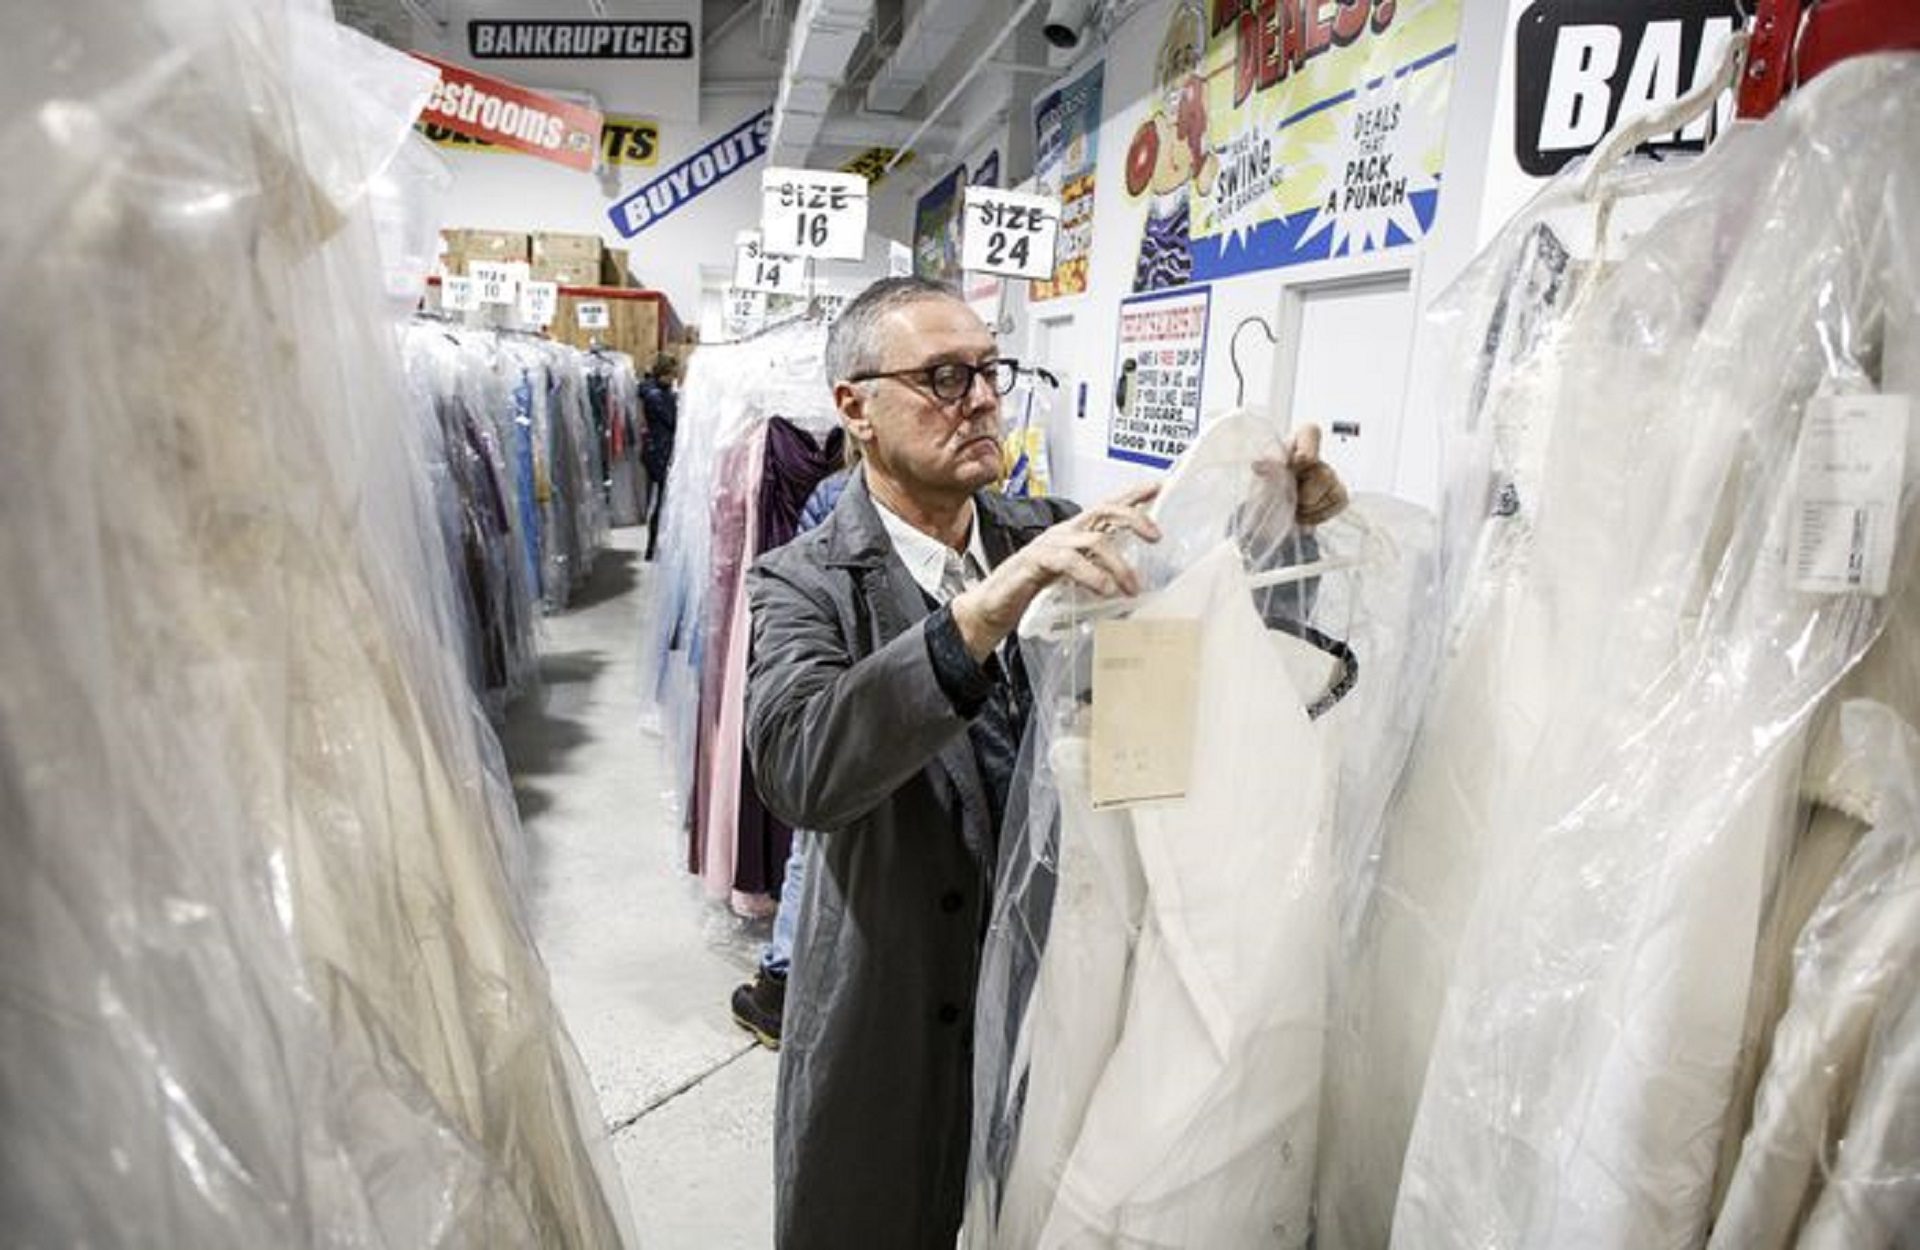 Mark Butler, Ollie's president and CEO, looks at the dresses being offered in the sale. Ollie's Bargain Outlet purchased 11,000 wedding dresses and 18,000 formal, prom and bridesmaids dresses from a wedding distributor. For 10 days, the dresses are available at two Harrisburg-area stores. February 7, 2019.